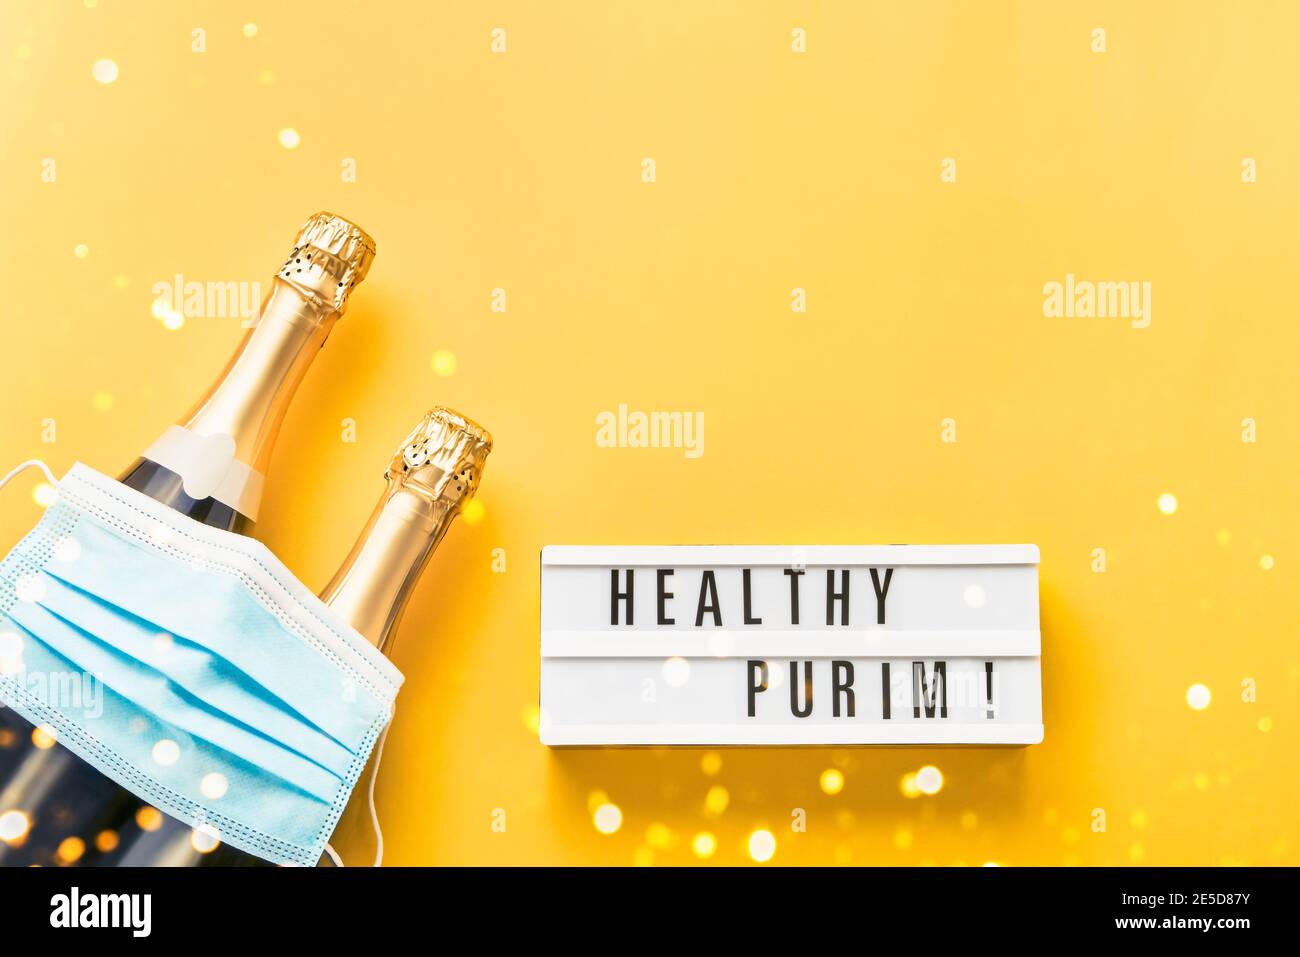 Healthy Purim written in lightbox, two champagne bottles, and medical mask on a yellow background. Stock Photo